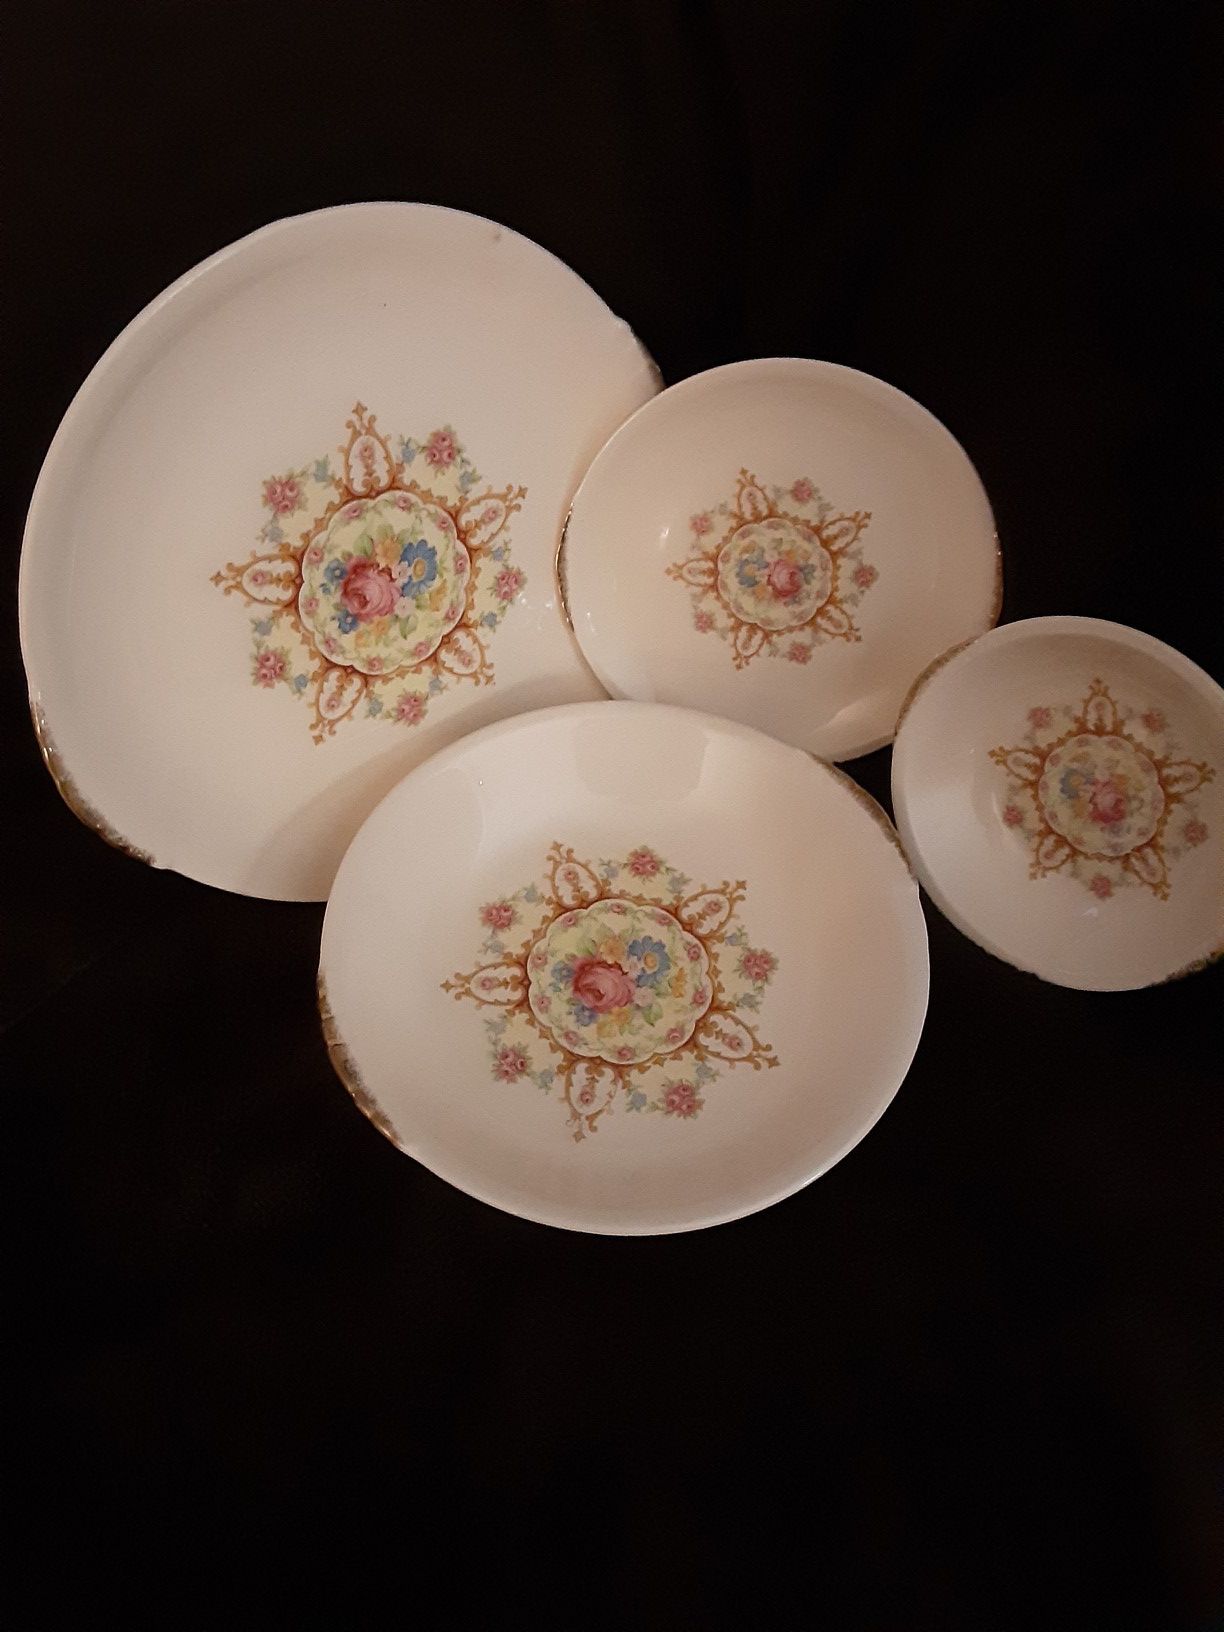 Vintage China Service for 6